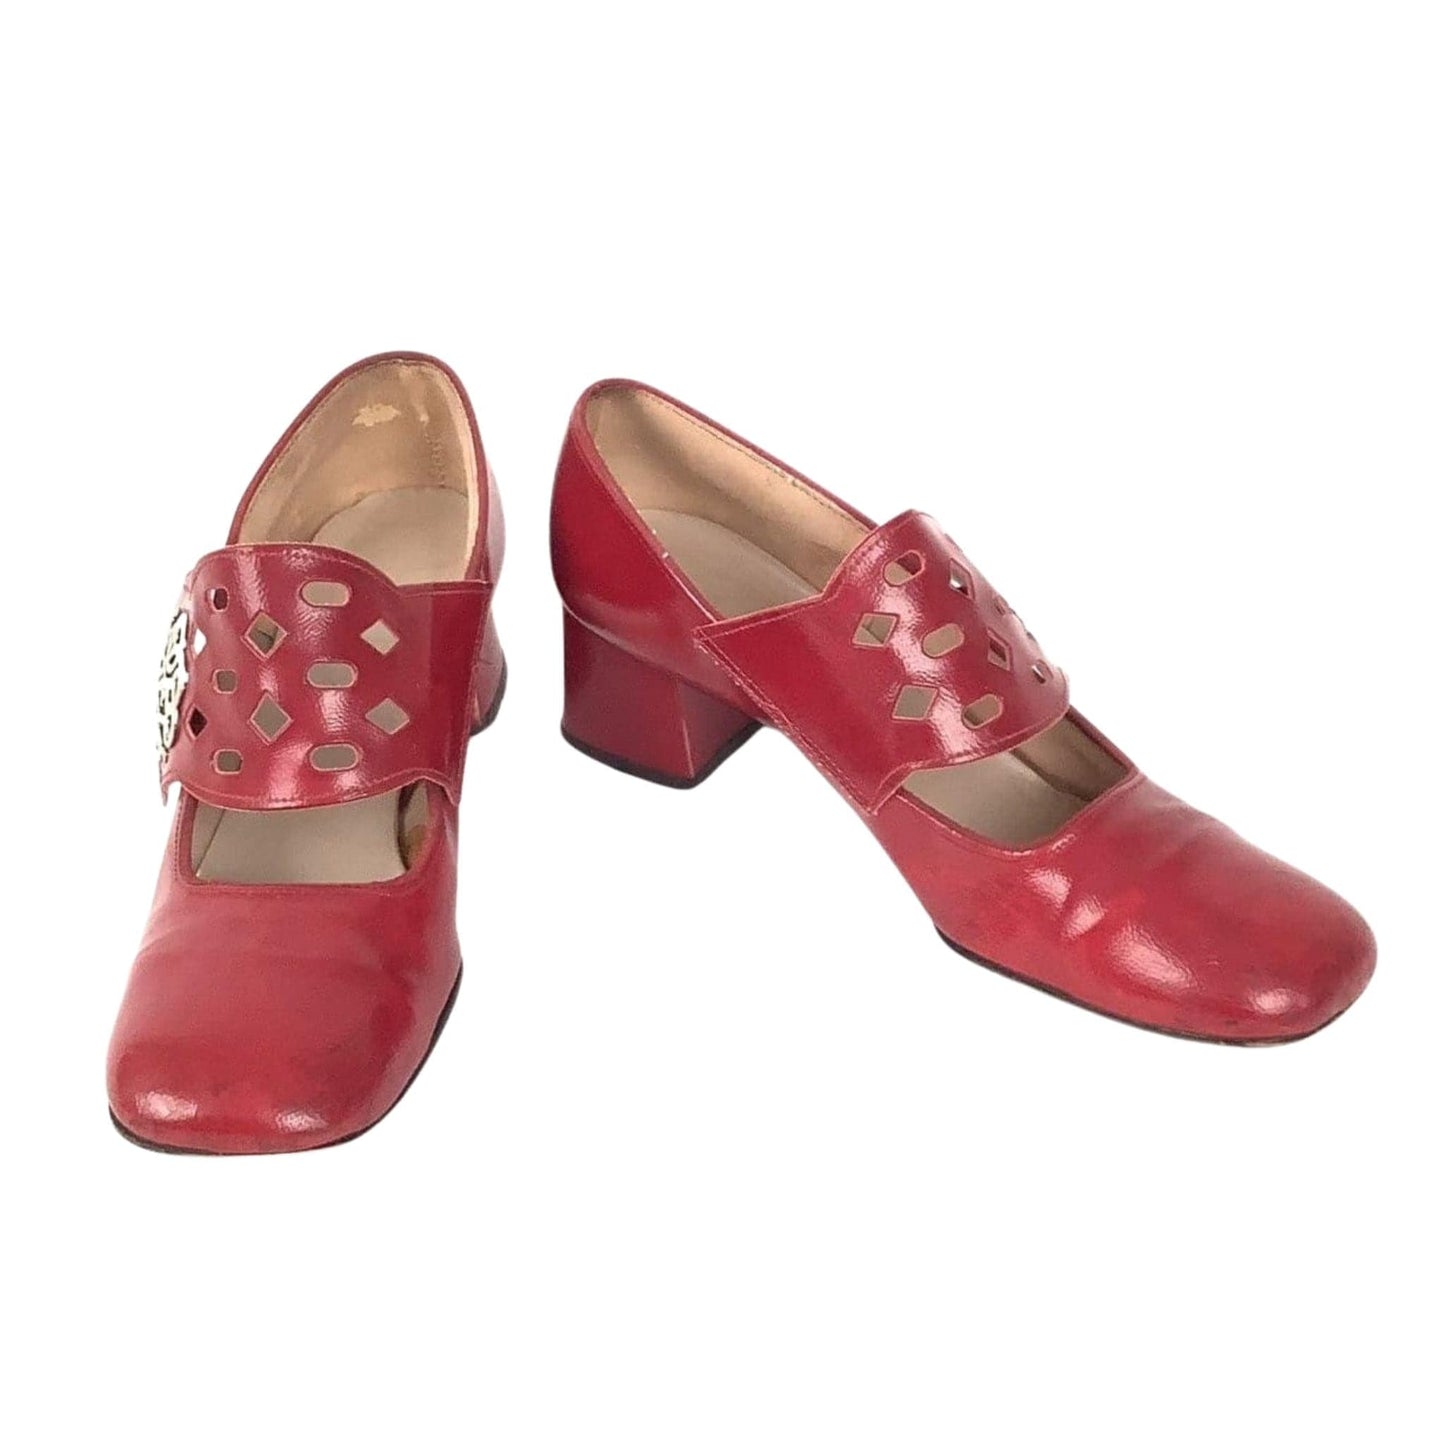 Sears Red Mary Janes 7.5 / Red / Mod